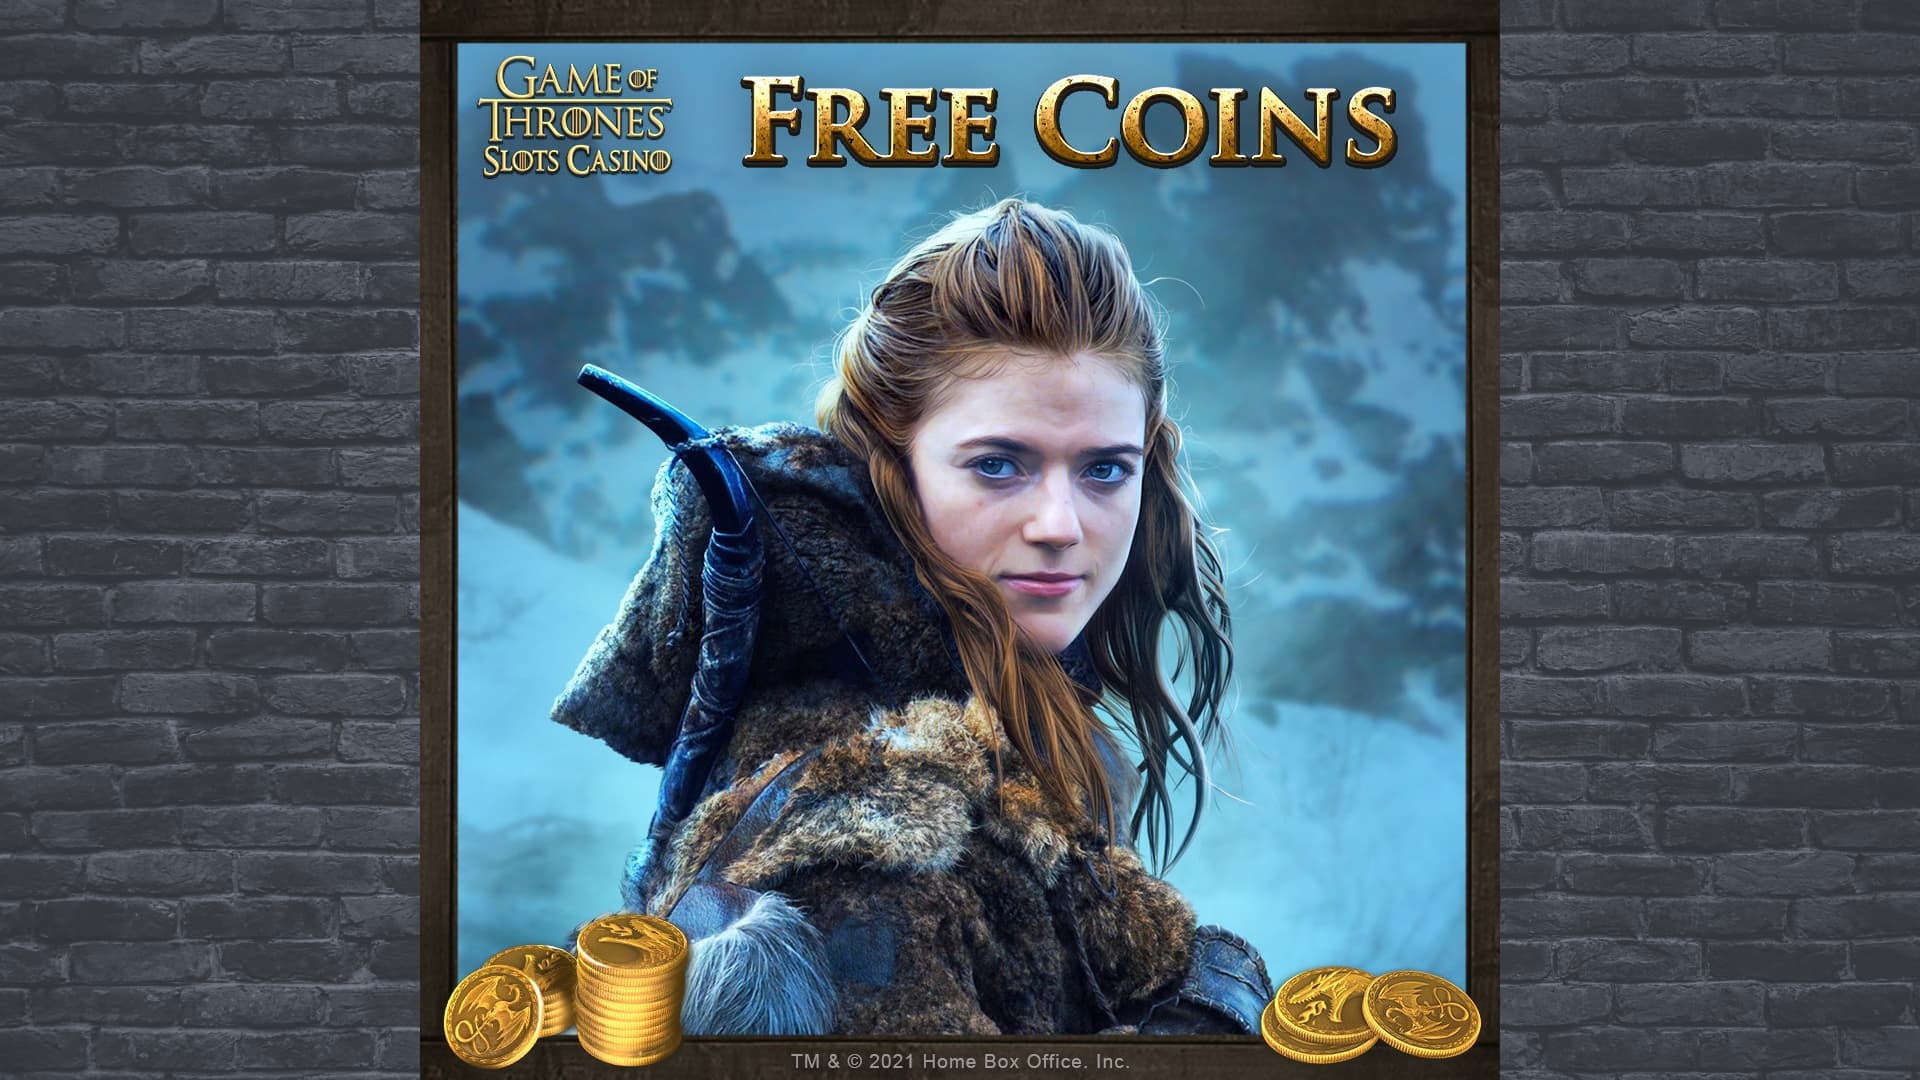 Game of Thrones Slots Casino Free Coins, Add Players & Forum - bitcoinhelp.fun